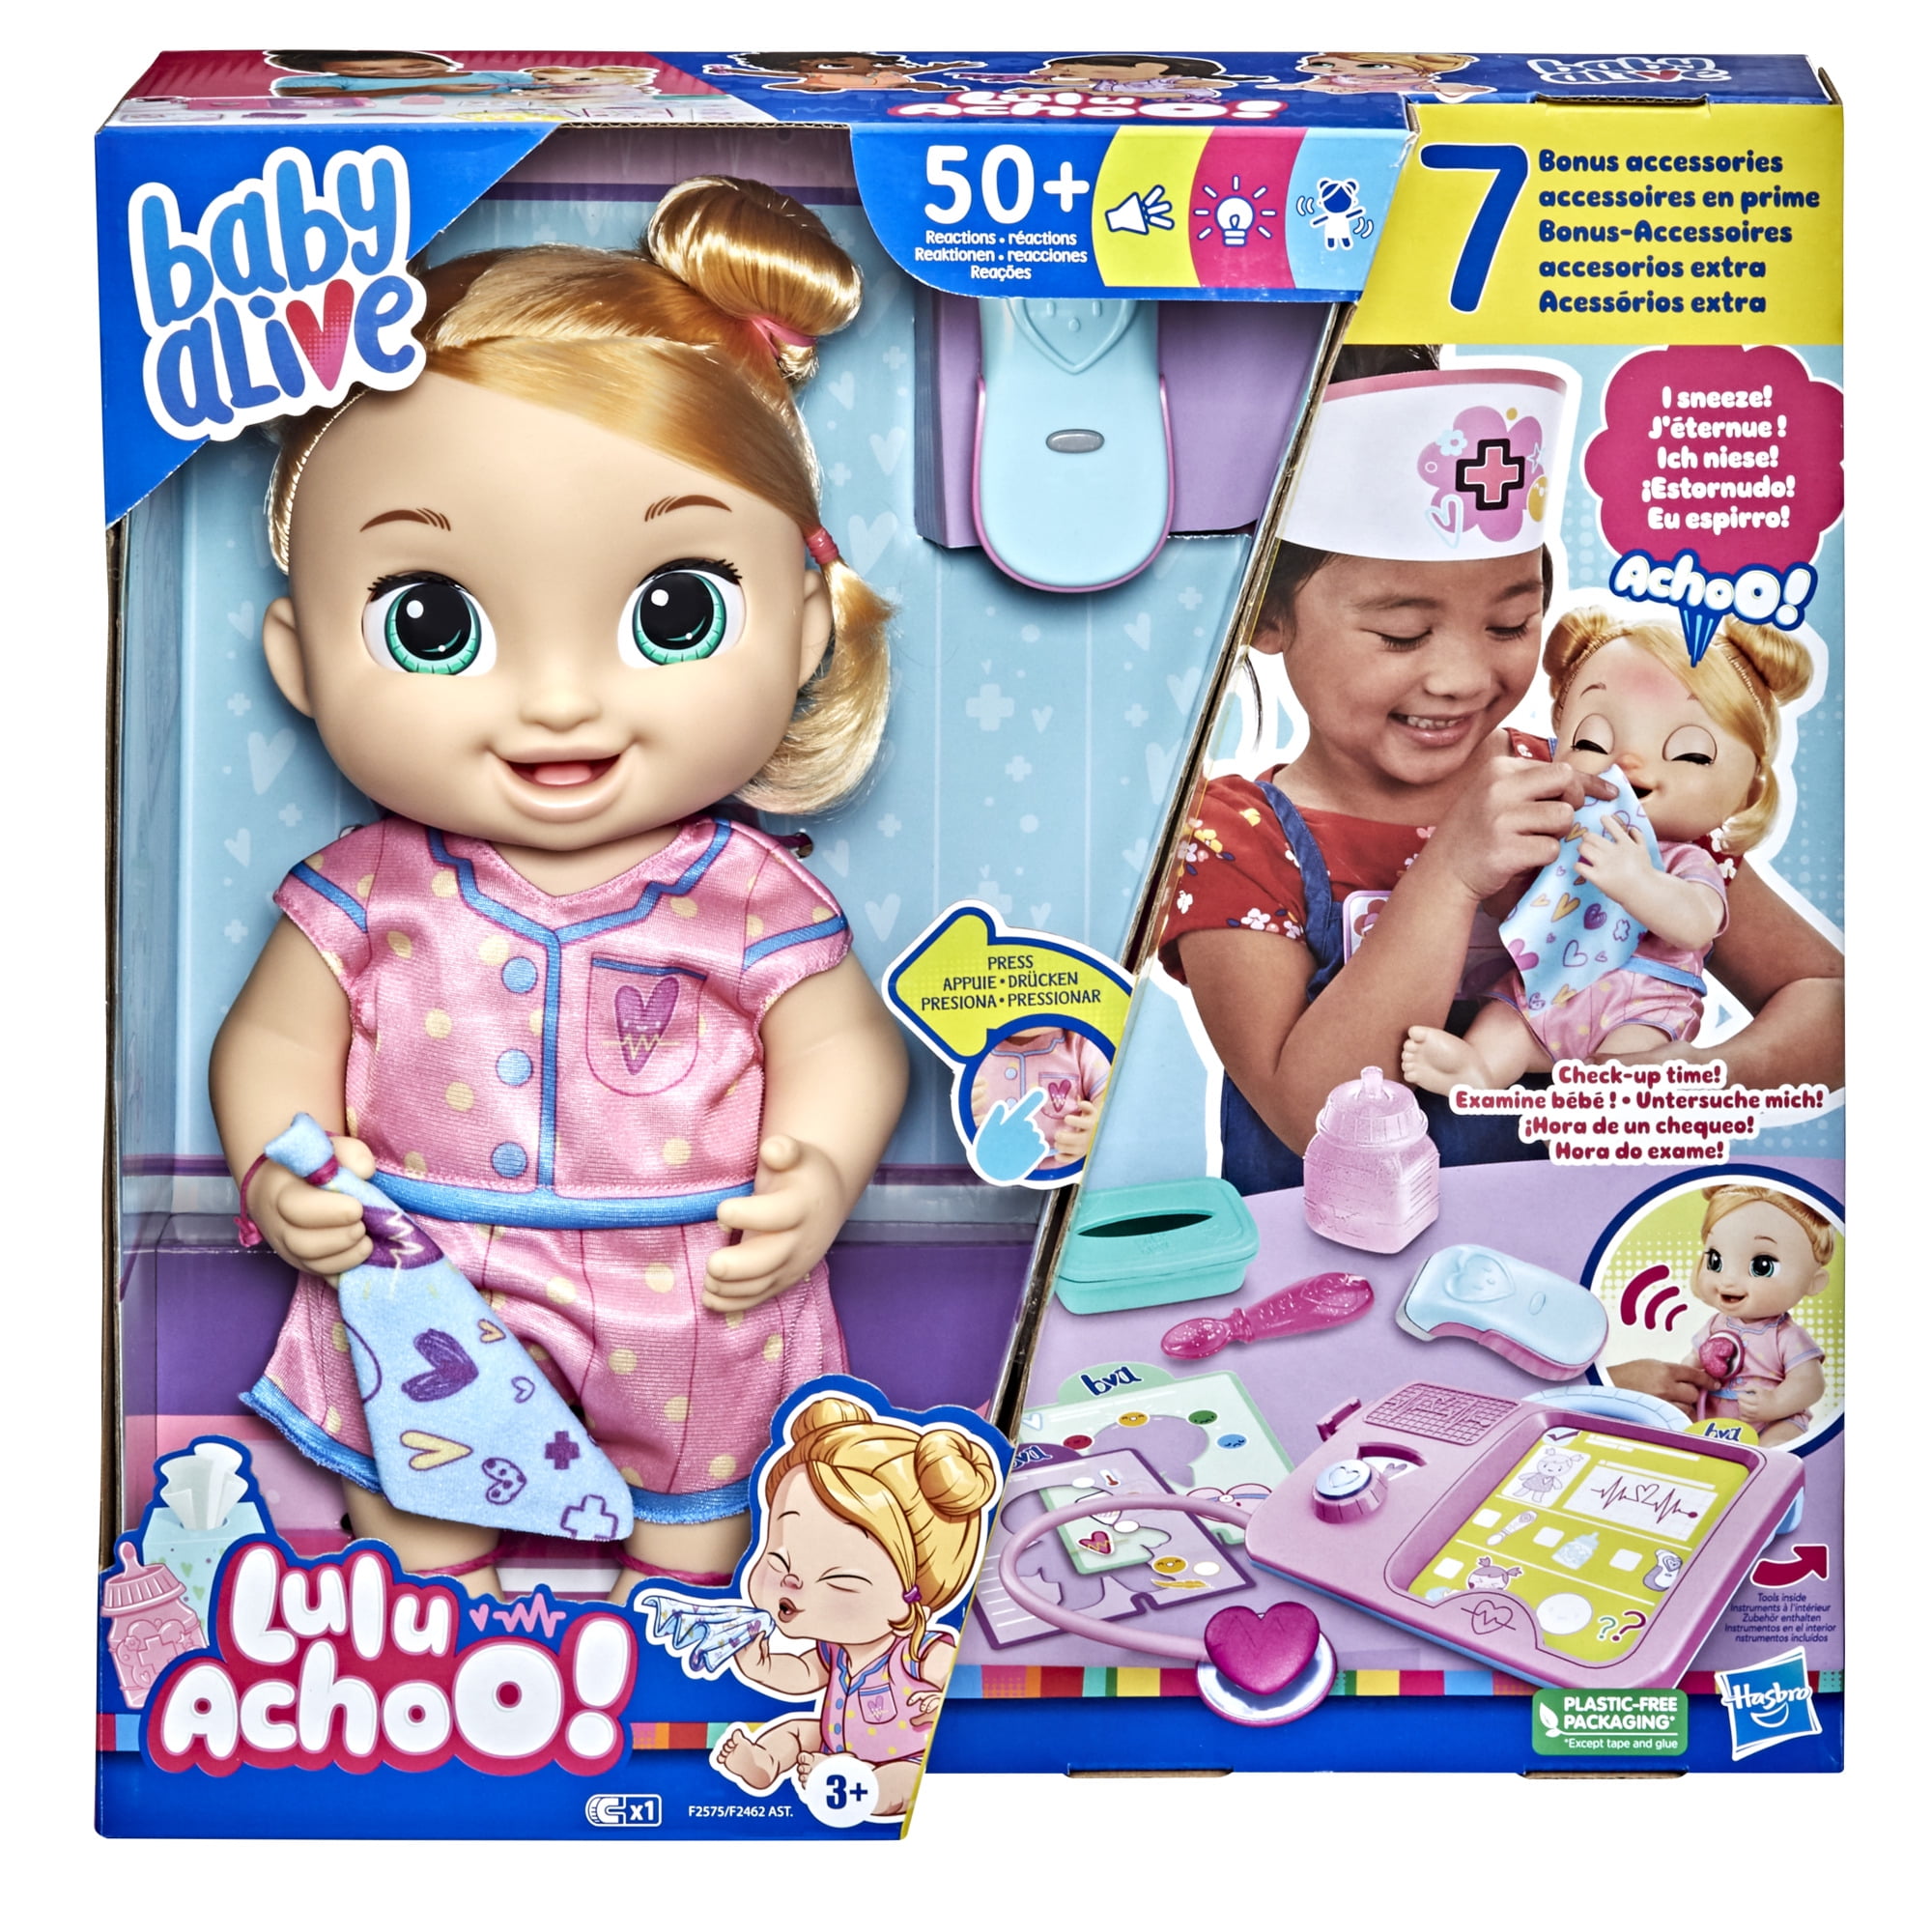 Super Cute Baby Alive Better Now Baby Doll W/ Play Stethoscope By Hasbro New! 